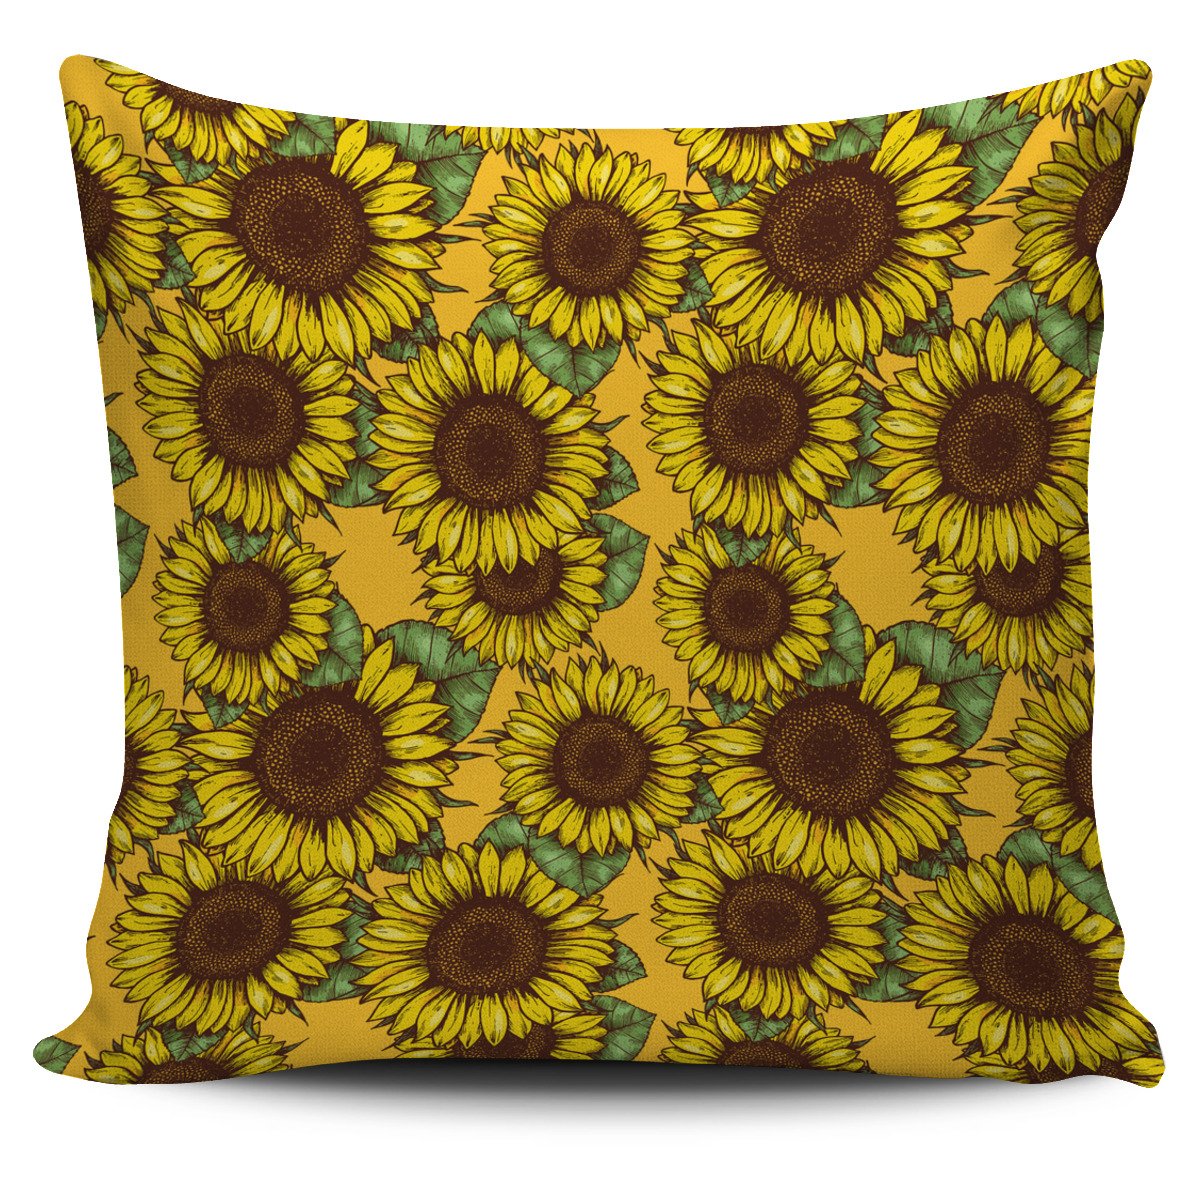 Classic Vintage Sunflower Pattern Print Pillow Cover